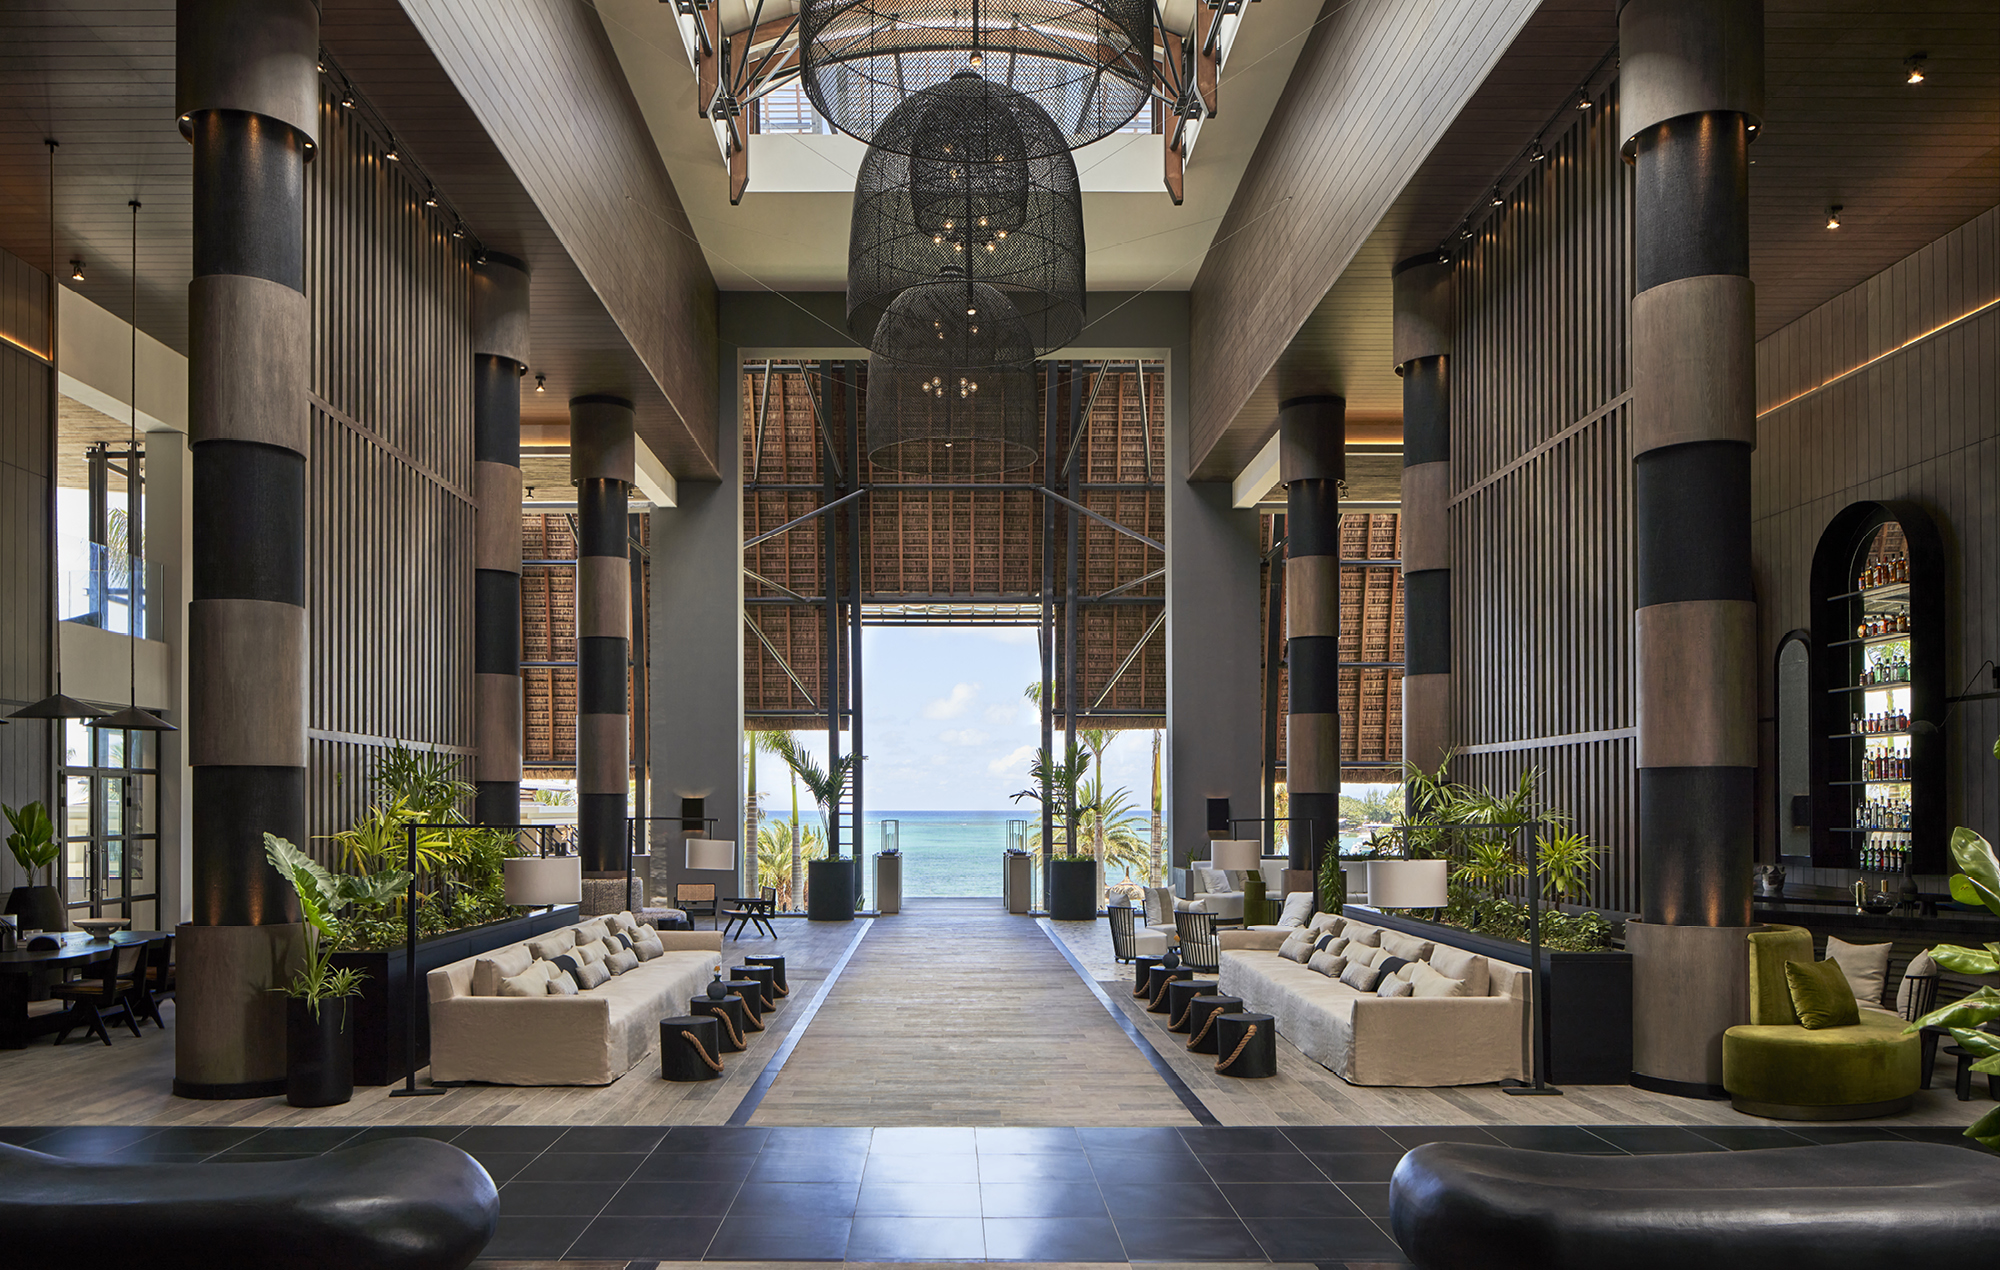 The striking lobby at LUX* Grand Baie